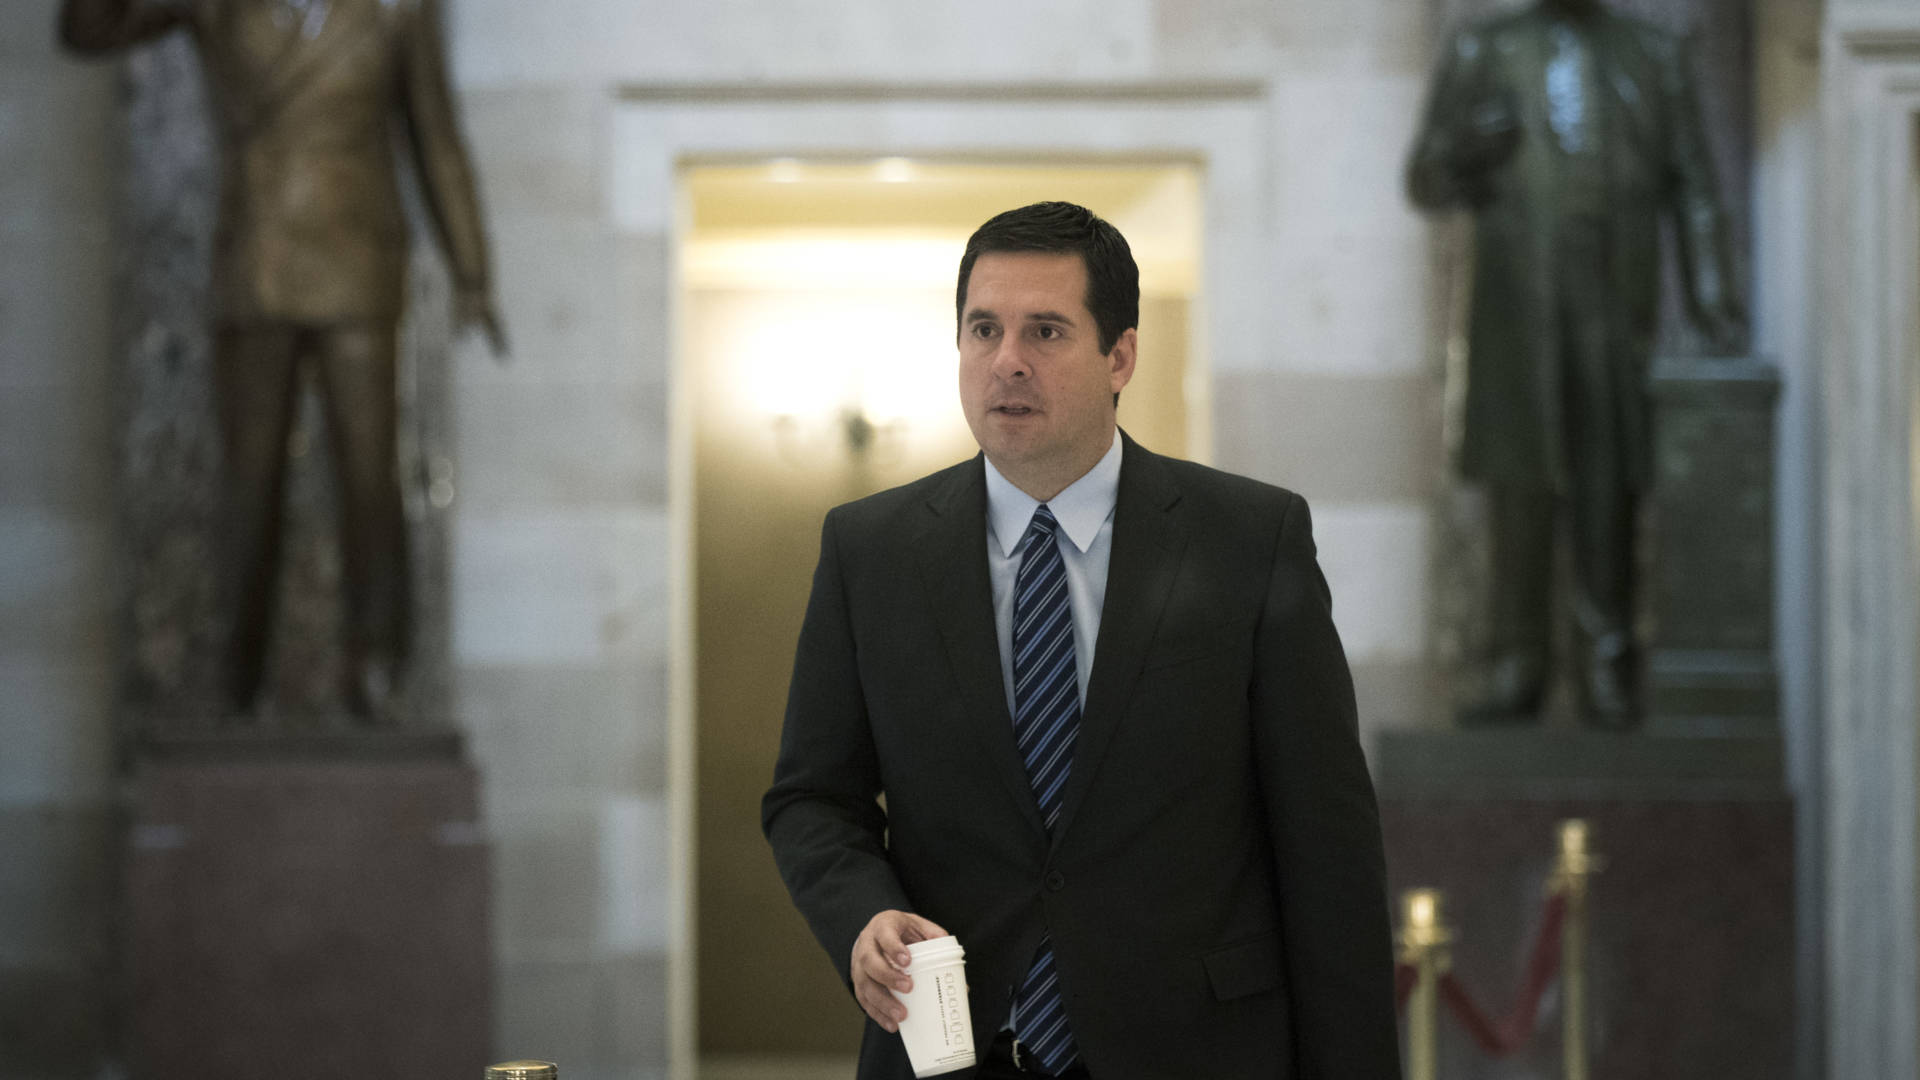 House Intelligence Committee chairman Rep. Devin Nunes (R-CA) walks to the House floor on Capitol Hill on Friday. Nunes has been challenged by his colleagues about how he acquired and handled classified information that he didn't share with the rest of the committee. Drew Angerer/Getty Images